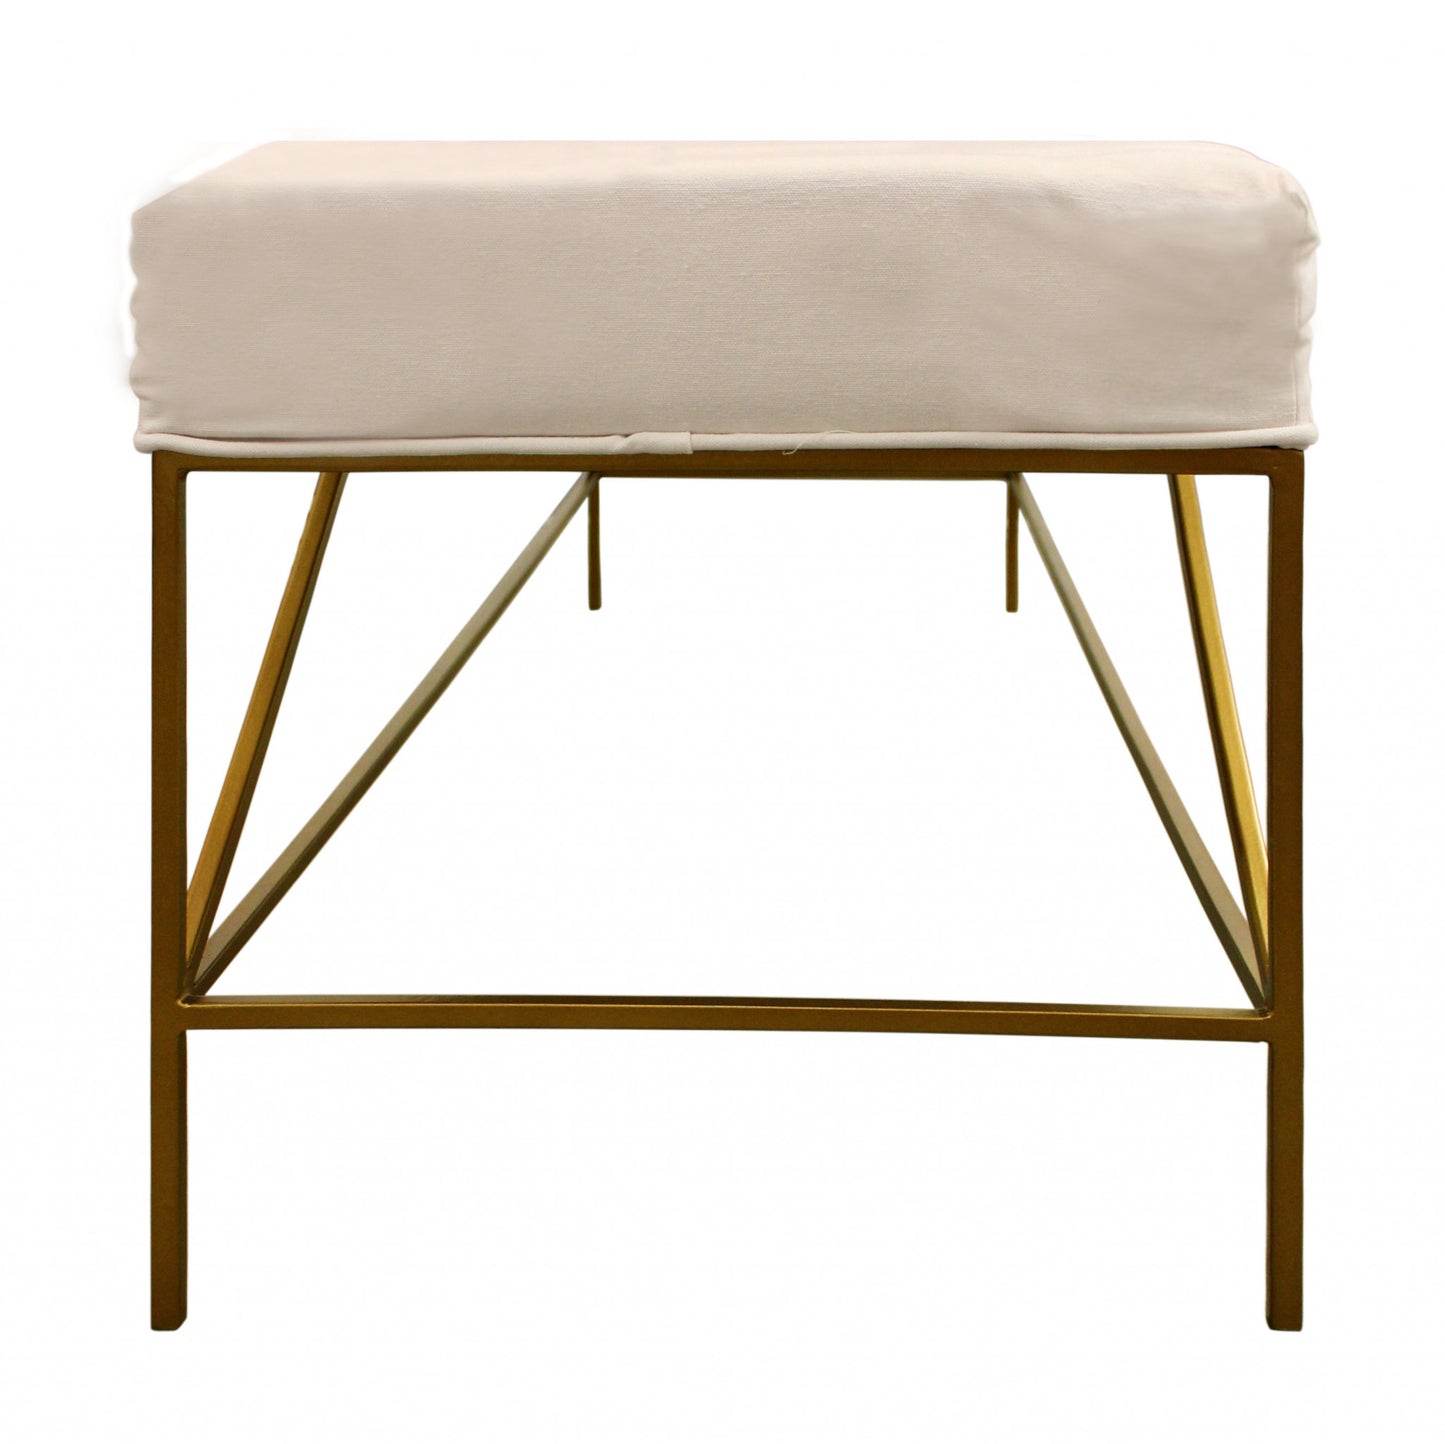 58" Ivory And Gold 100% Linen Upholstered Entryway Bench By Homeroots